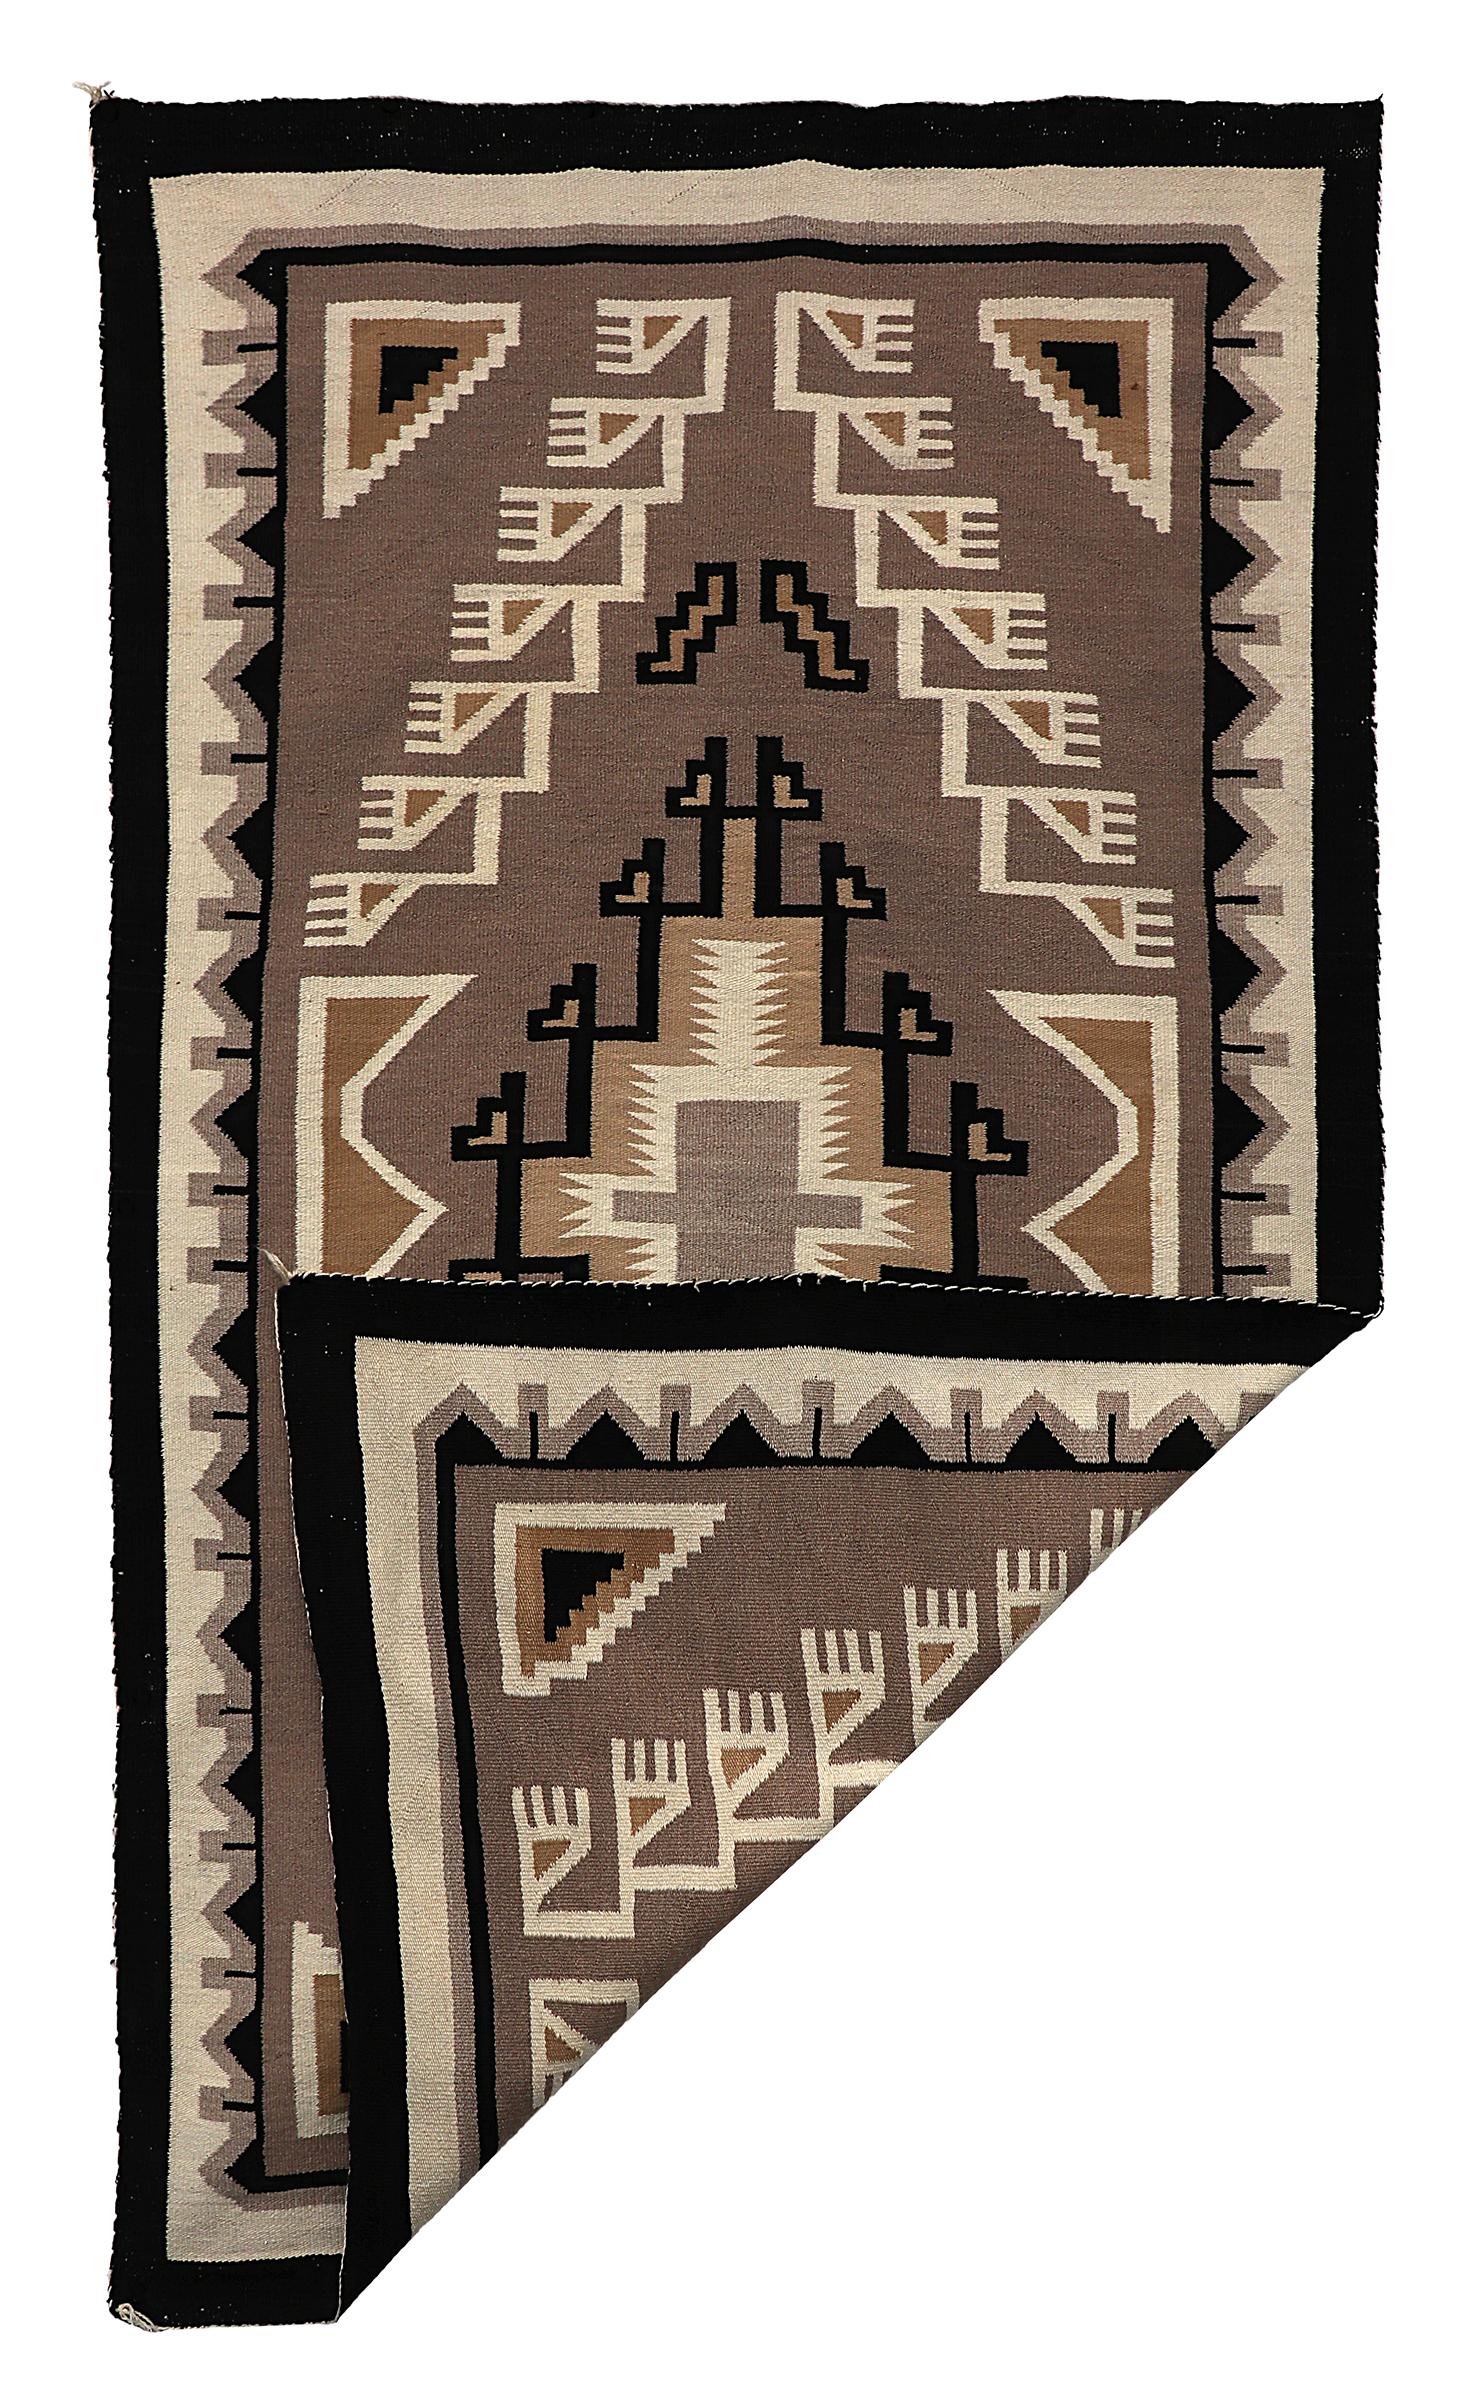 Navajo Area Rug, Two Gray Hills, Trading Post Era weaving made of wool , measures 81 ¾ x 46 ¾ inches.
This textile is well suited for use on the floor as an area rug or as a wall hanging.
The Diné (Navajo) peoples are a Native American Indian tribal